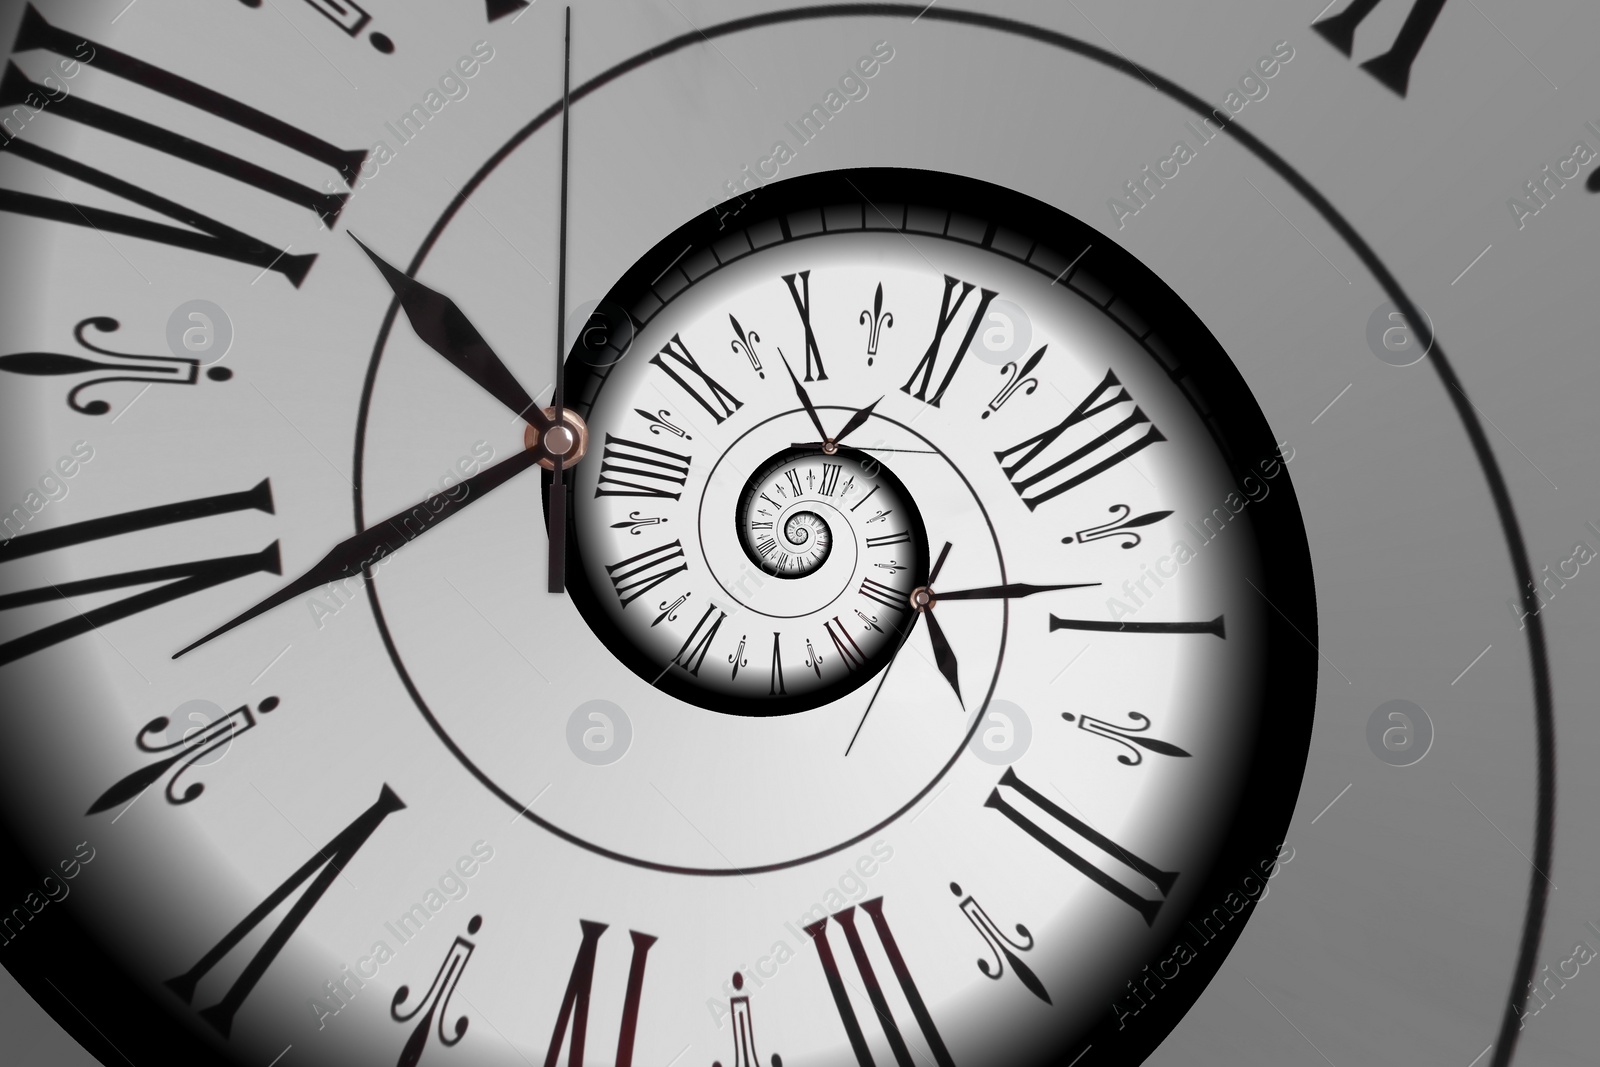 Image of Infinity and other time related concepts. White clock face with roman numerals twisted in spiral, fractal pattern